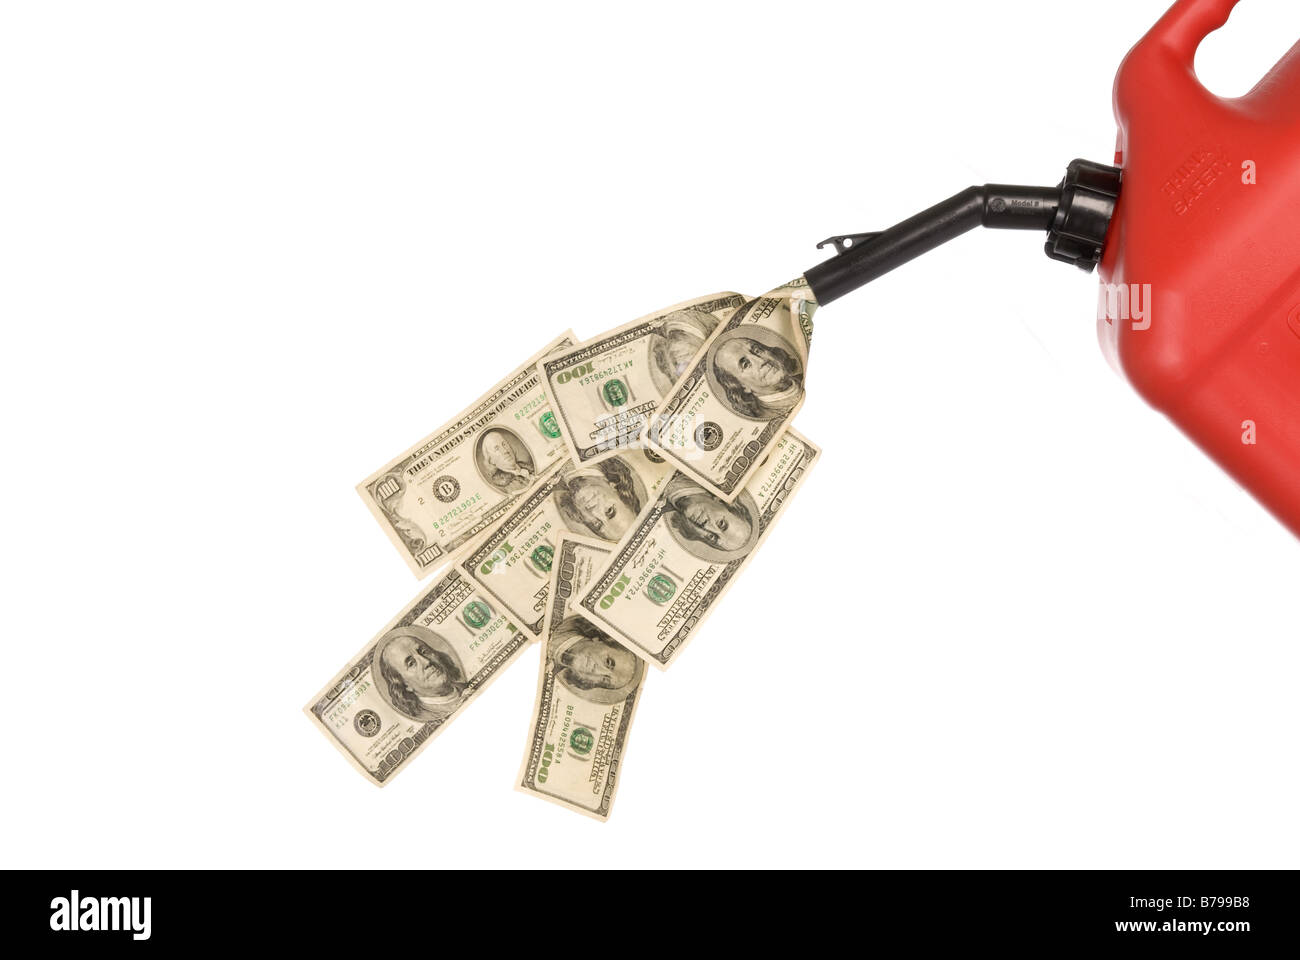 Gas can pouring out hundreds of dollars to mirror the high costs of gasoline Stock Photo